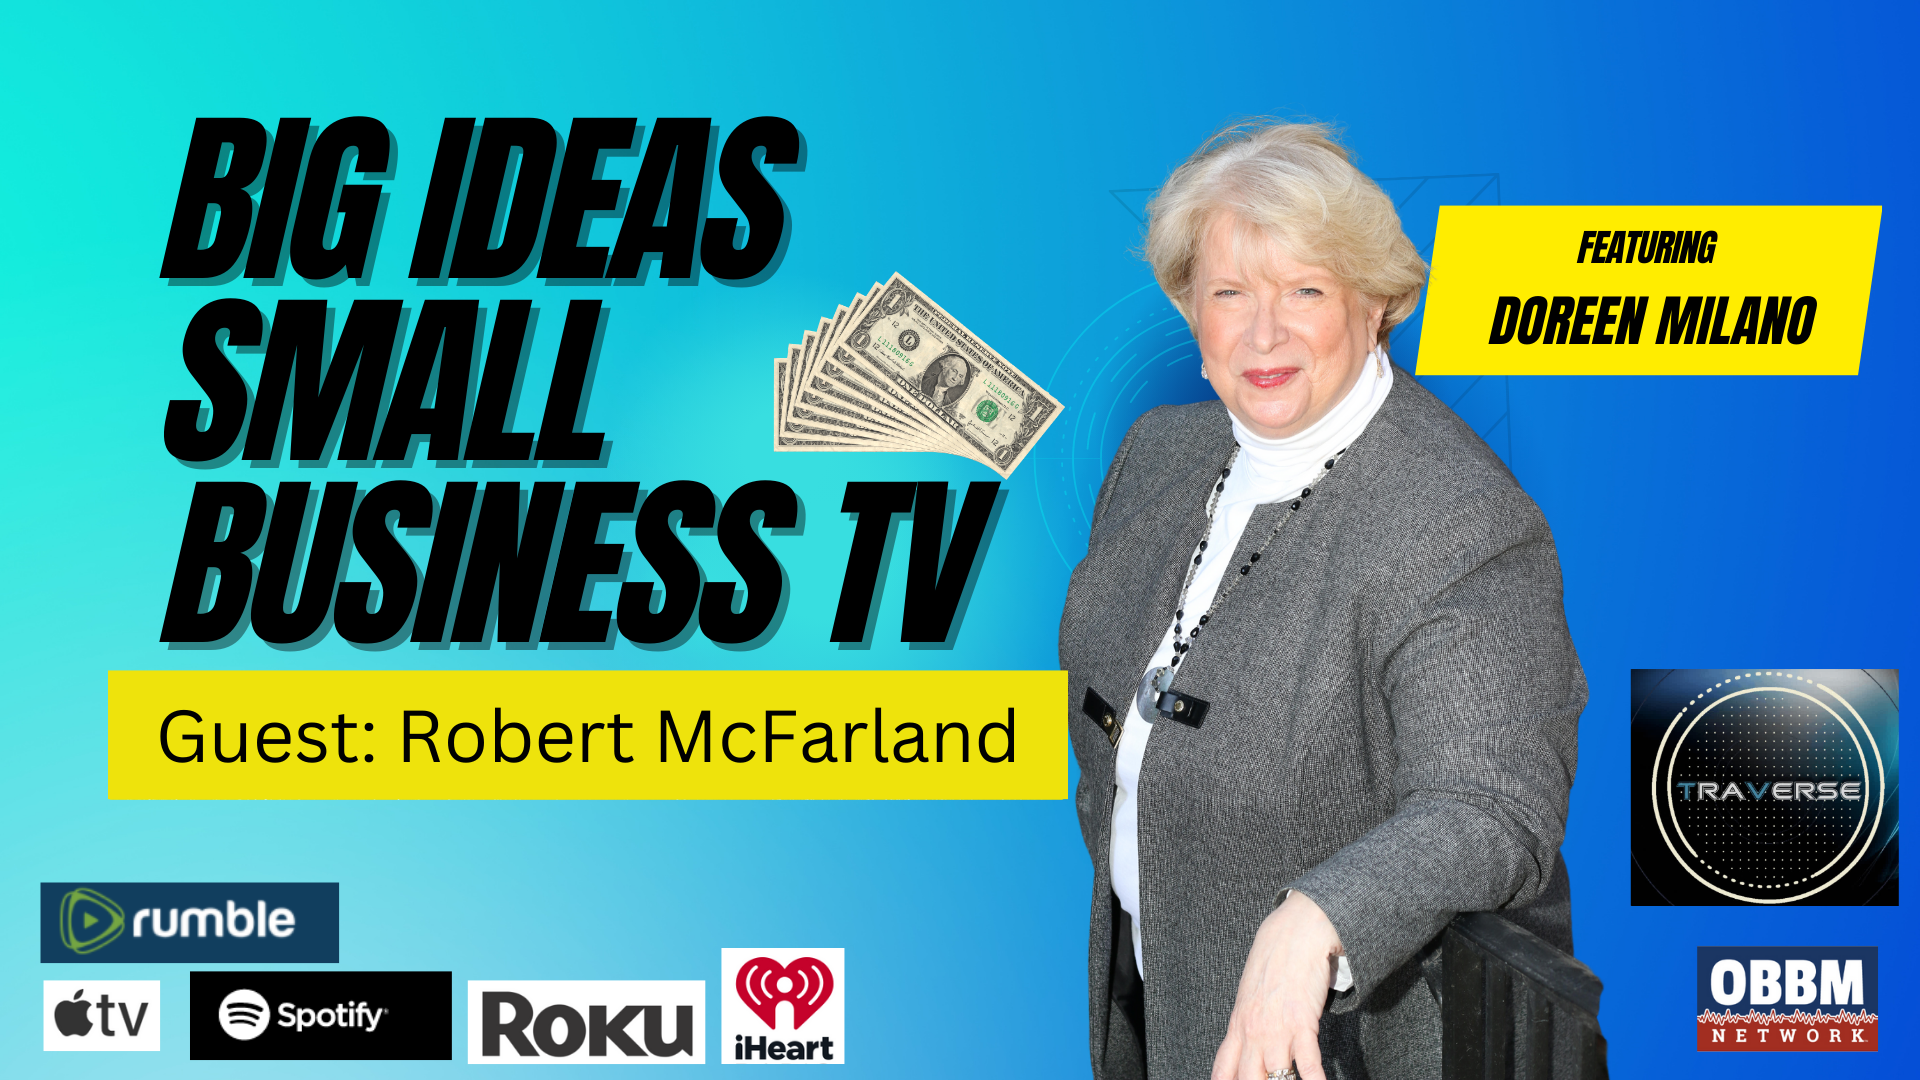 BISB14-Authority and Transformational Impact with Robert McFarland - Big Ideas Small Business TV